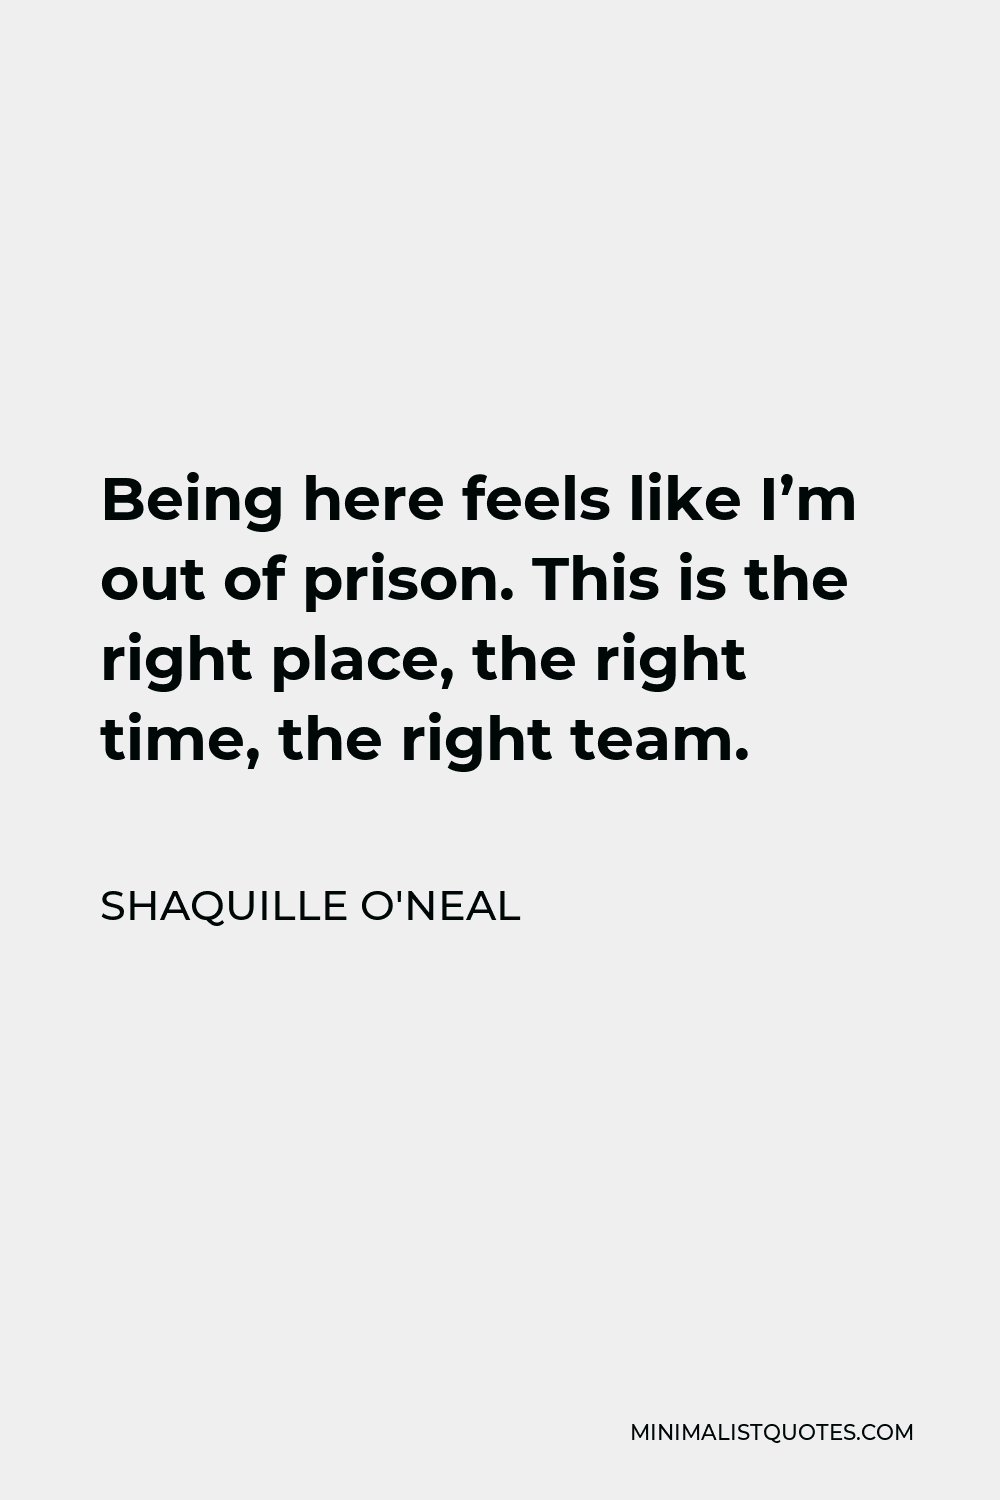 Shaquille O'Neal Quote - Being here feels like I’m out of prison. This is the right place, the right time, the right team.